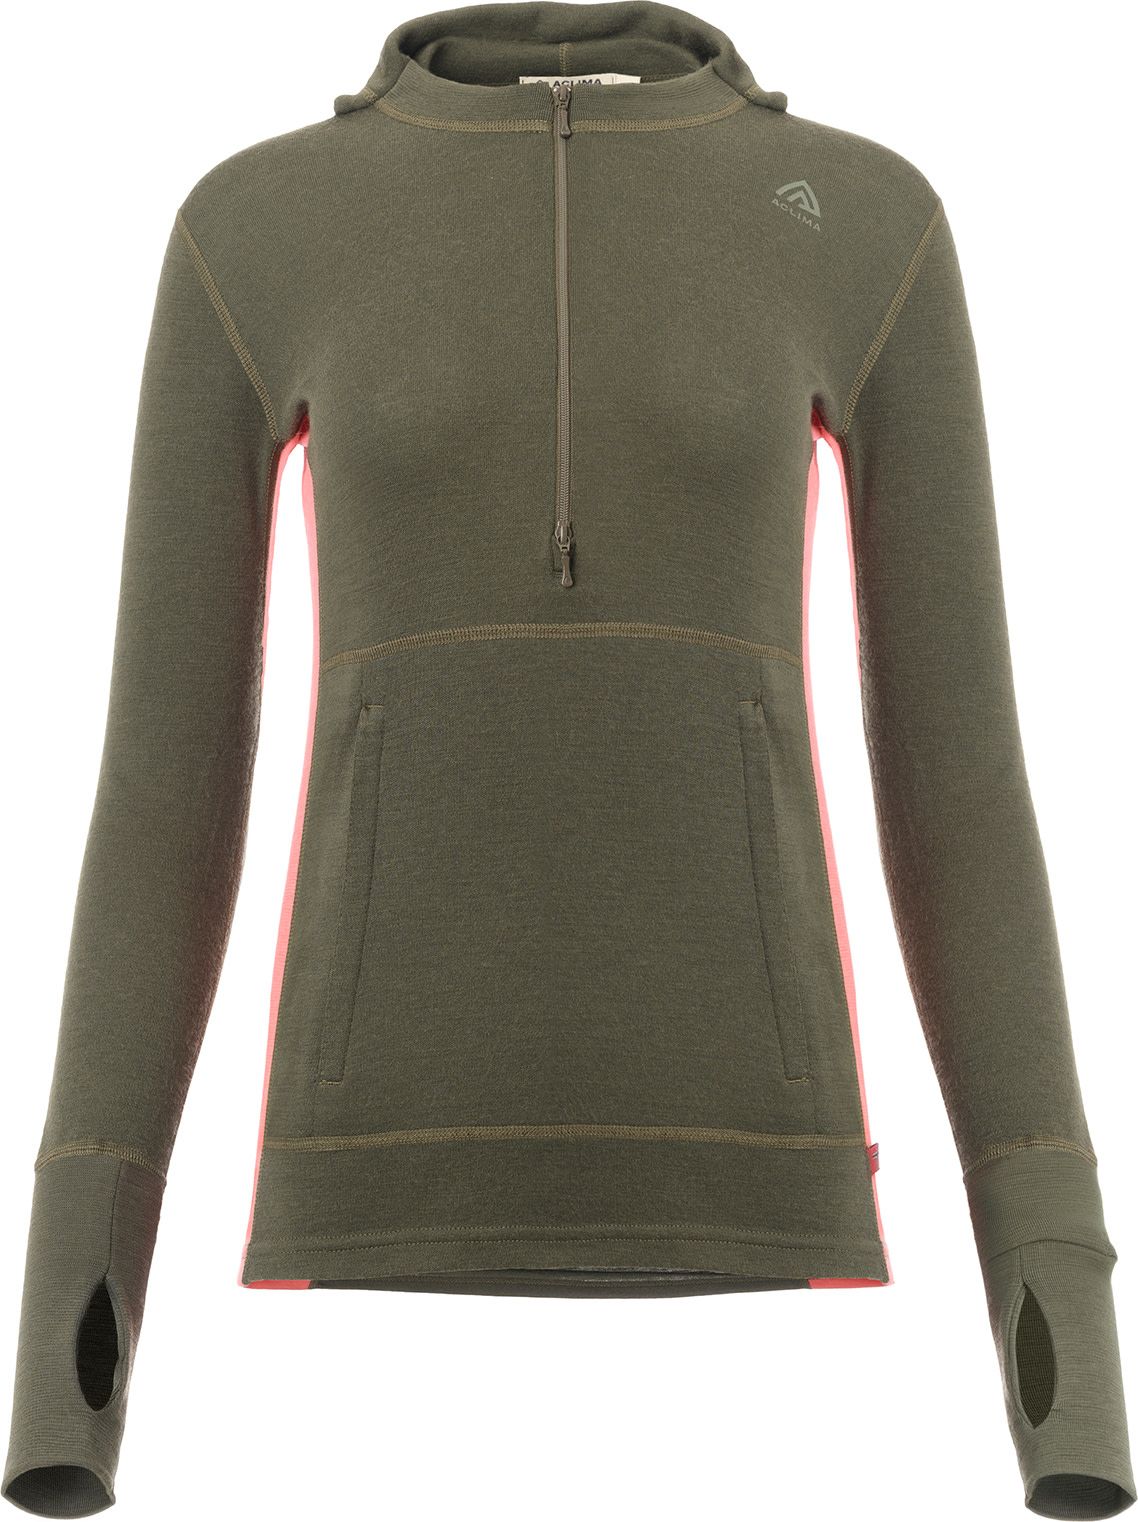 Aclima Women's WarmWool Hoodsweater with Zip Olive Night/Spiced Coral